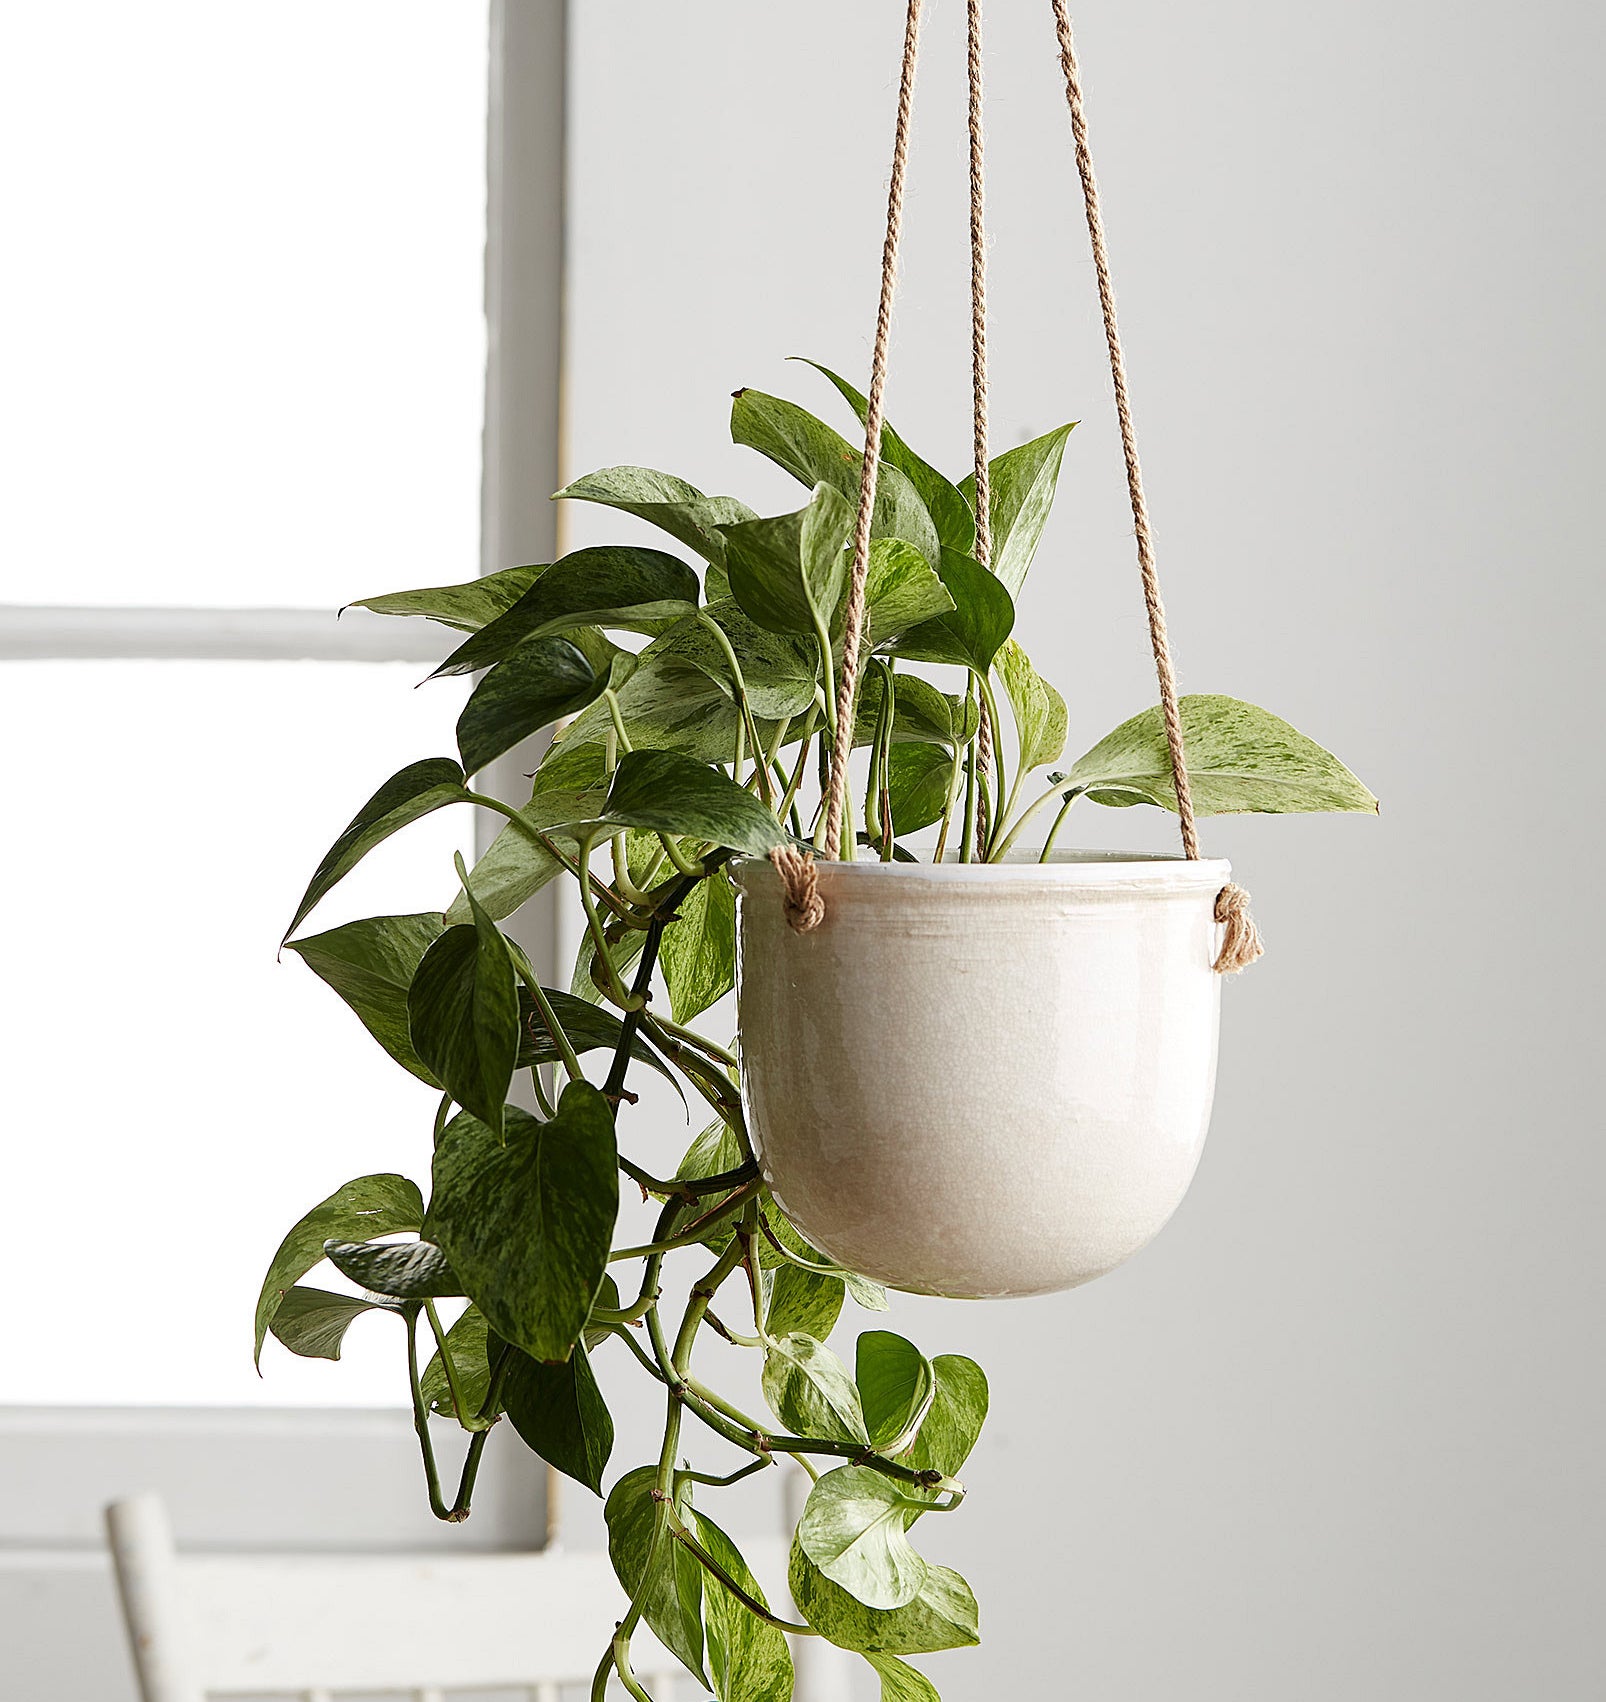 a hanging planter with a trailing plant inside